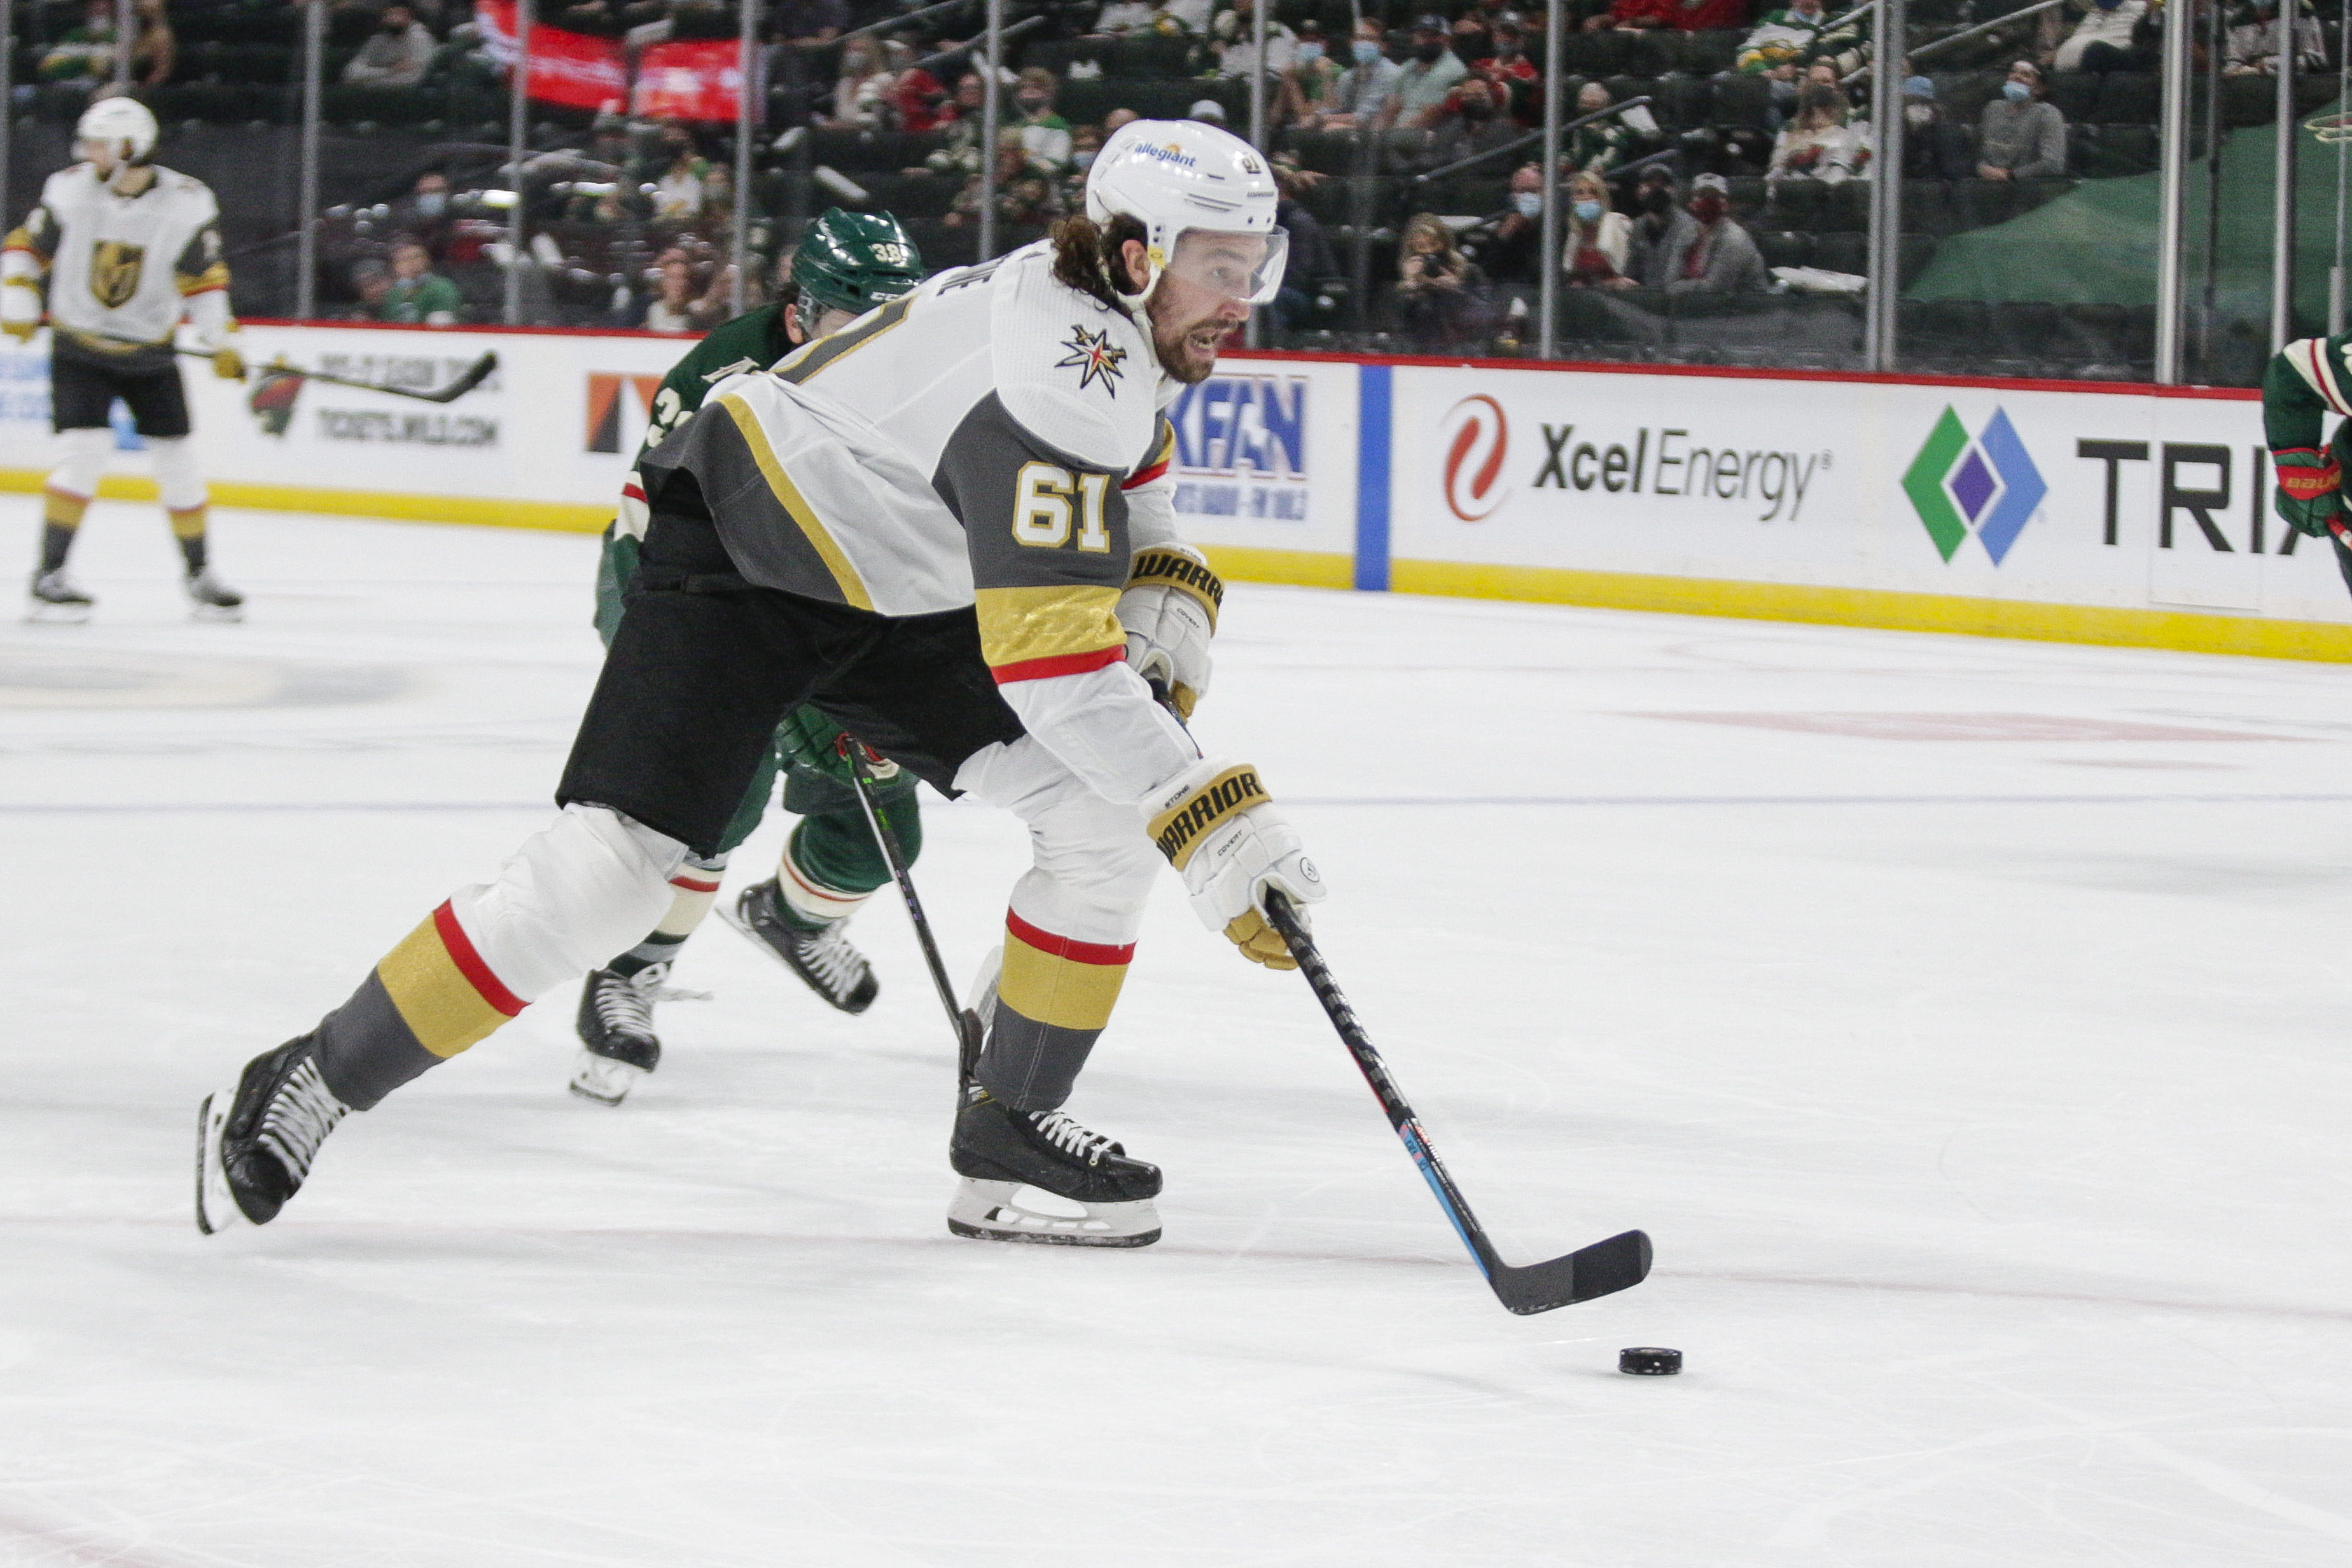 Minnesota Wild at Vegas Golden Knights Game 5 free live stream (5/24/21) How to watch NHL, time, channel